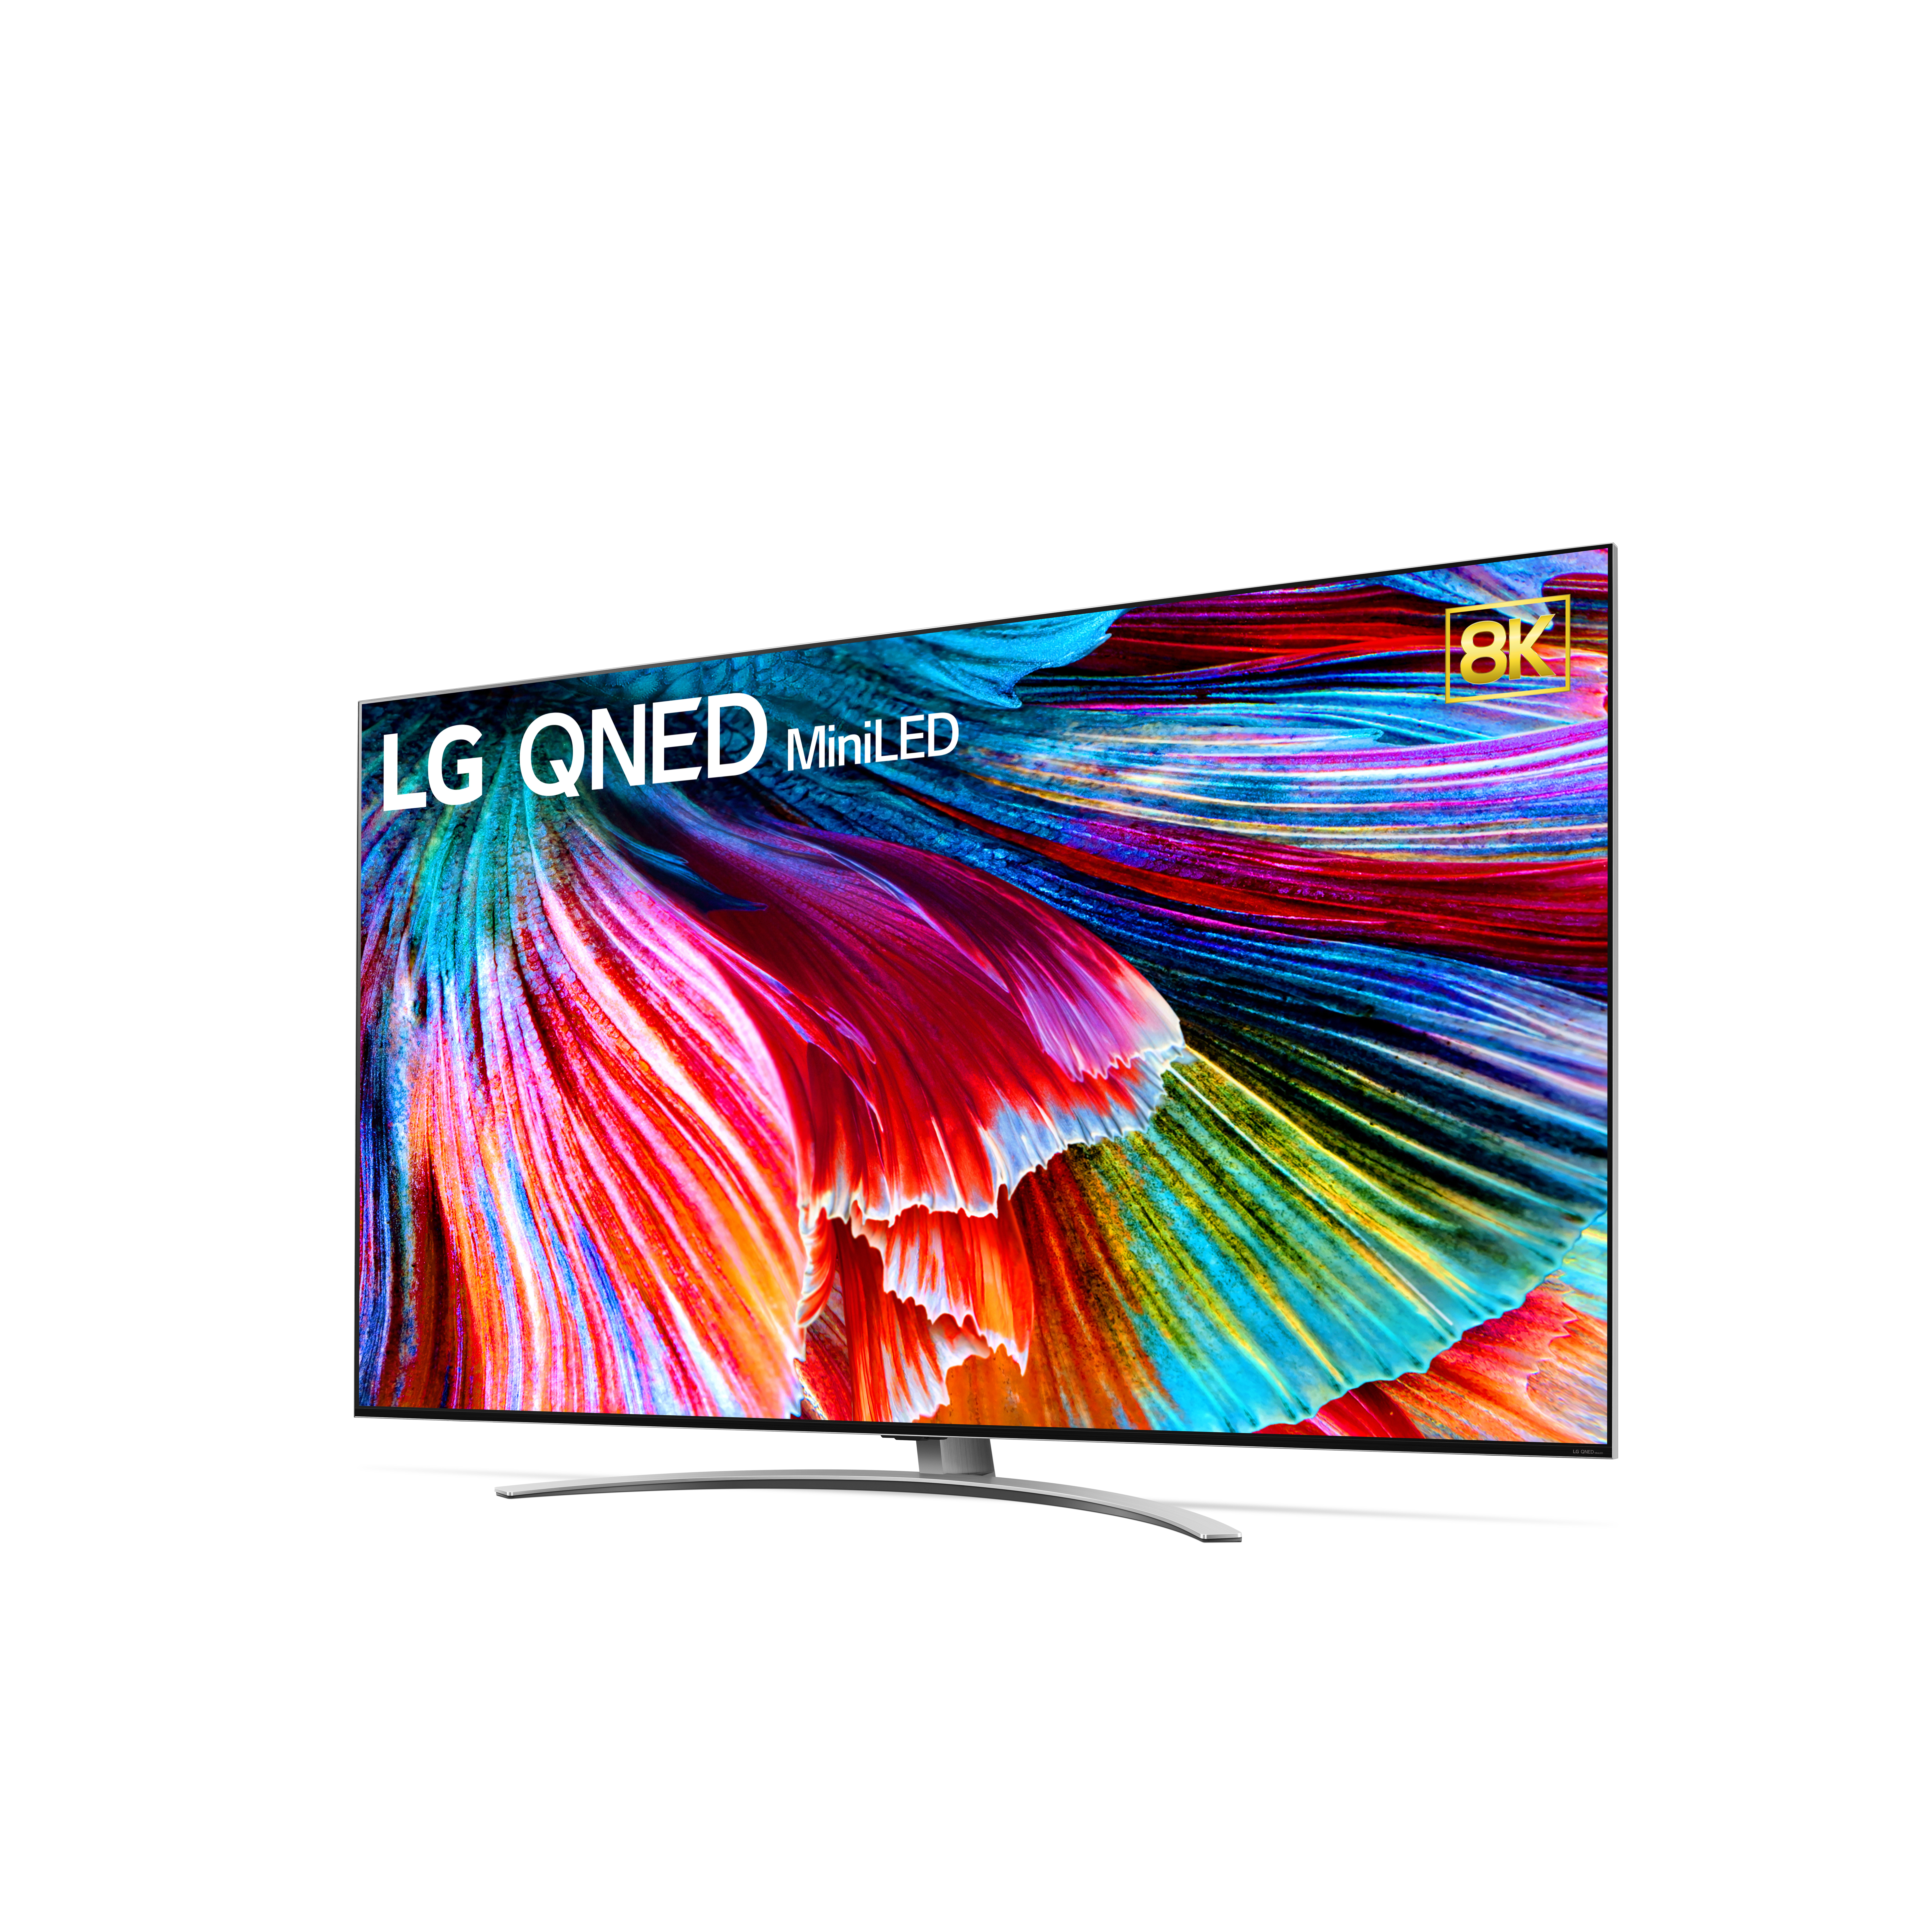 LG 86QNED999 218cm 86" 8K QNED miniLED 100 Hz Smart TV Fernseher